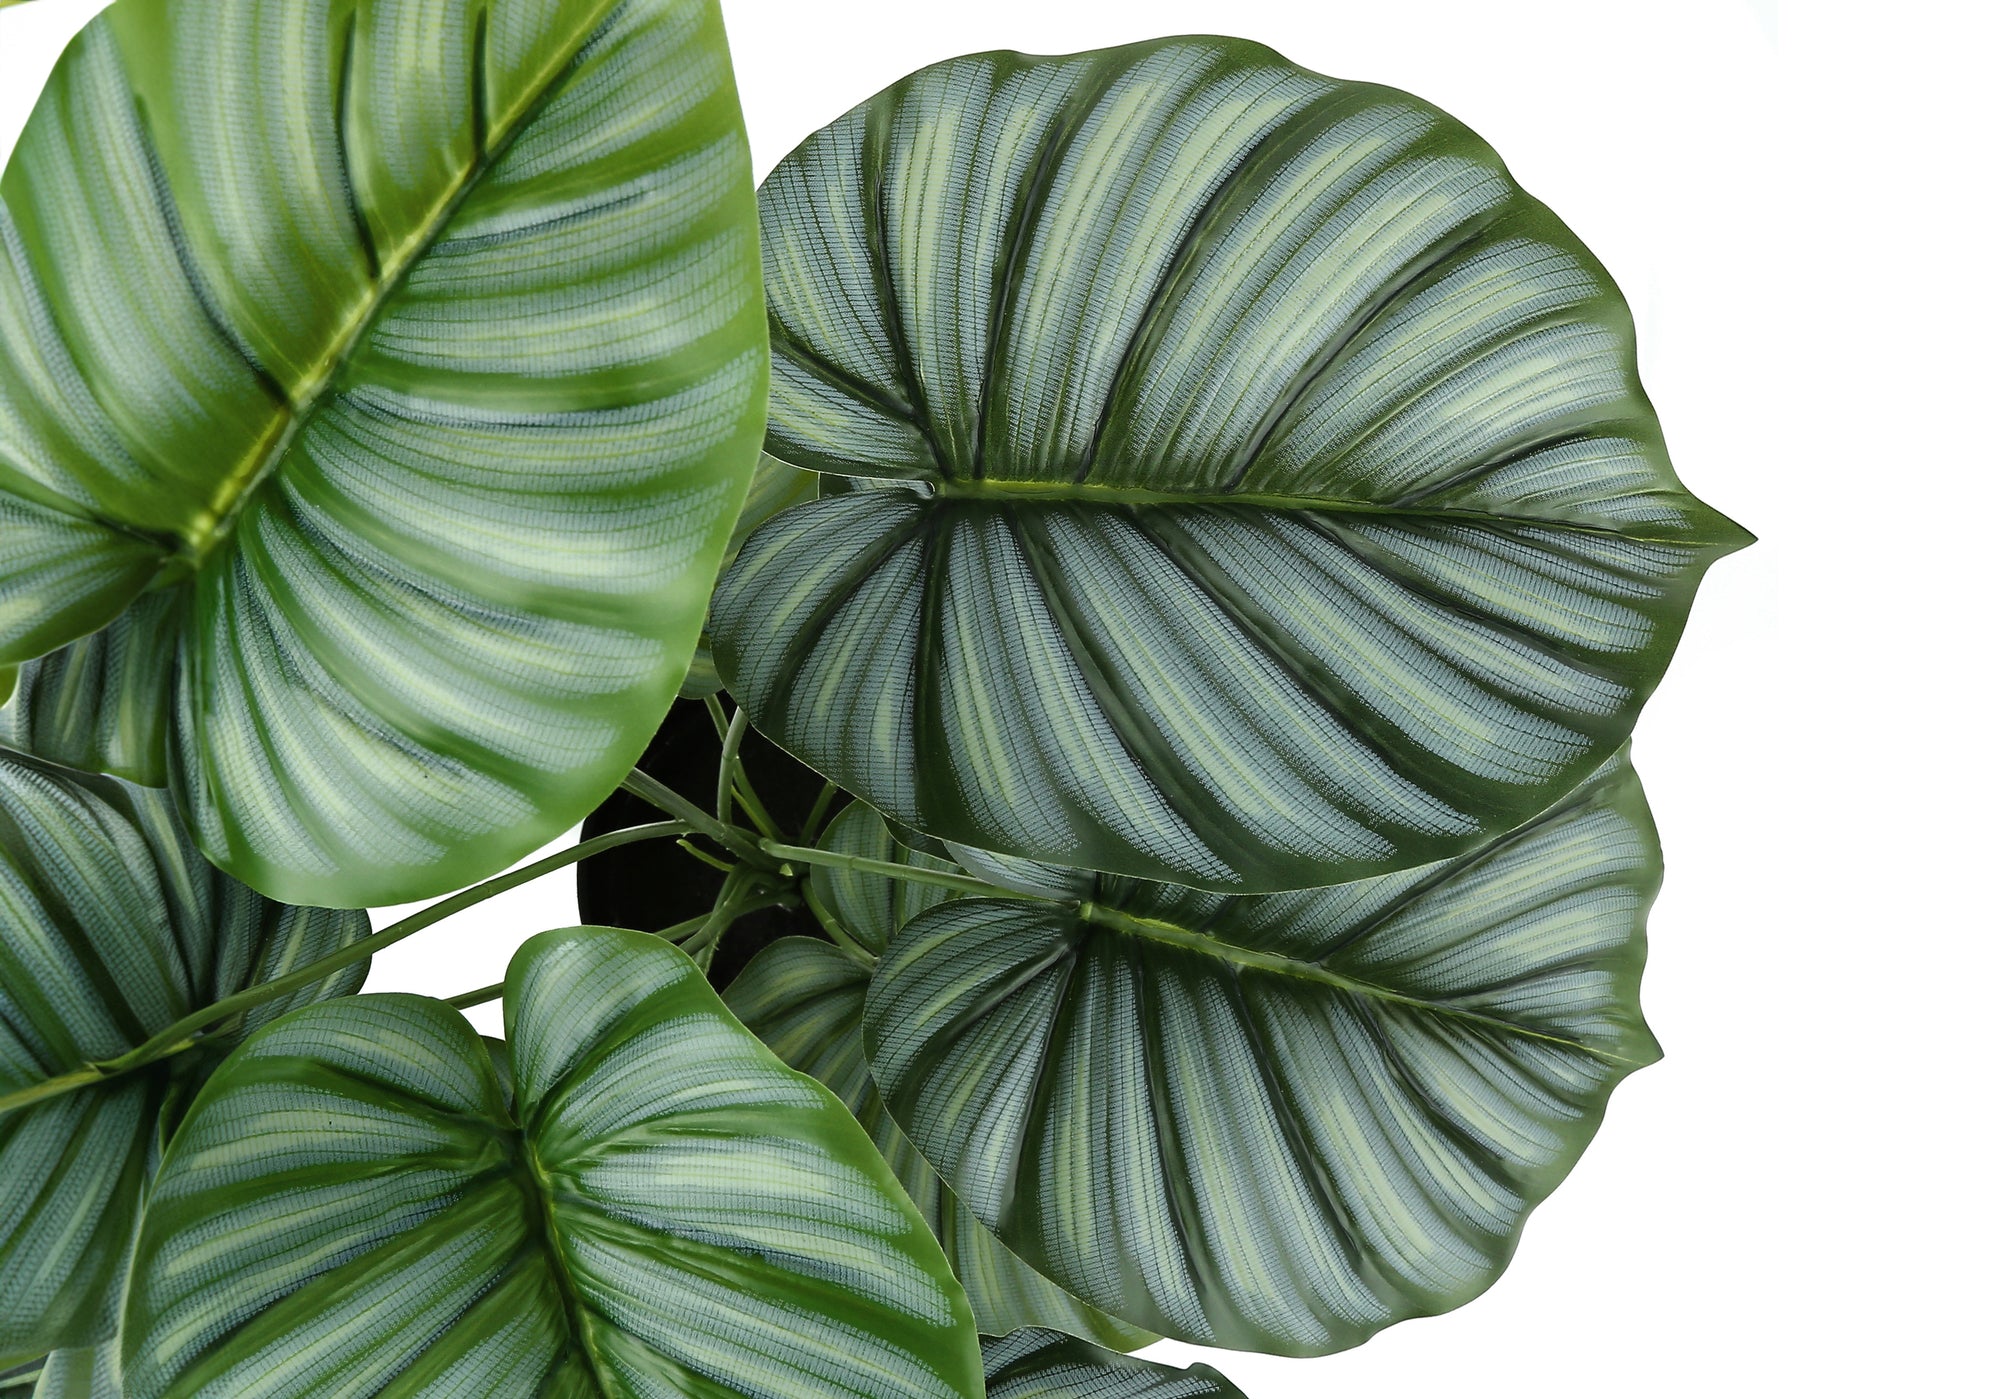 MN-689577    Artificial Plant, 24" Tall, Calathea, Indoor, Faux, Fake, Table, Greenery, Potted, Real Touch, Decorative, Green Leaves, Black Pot